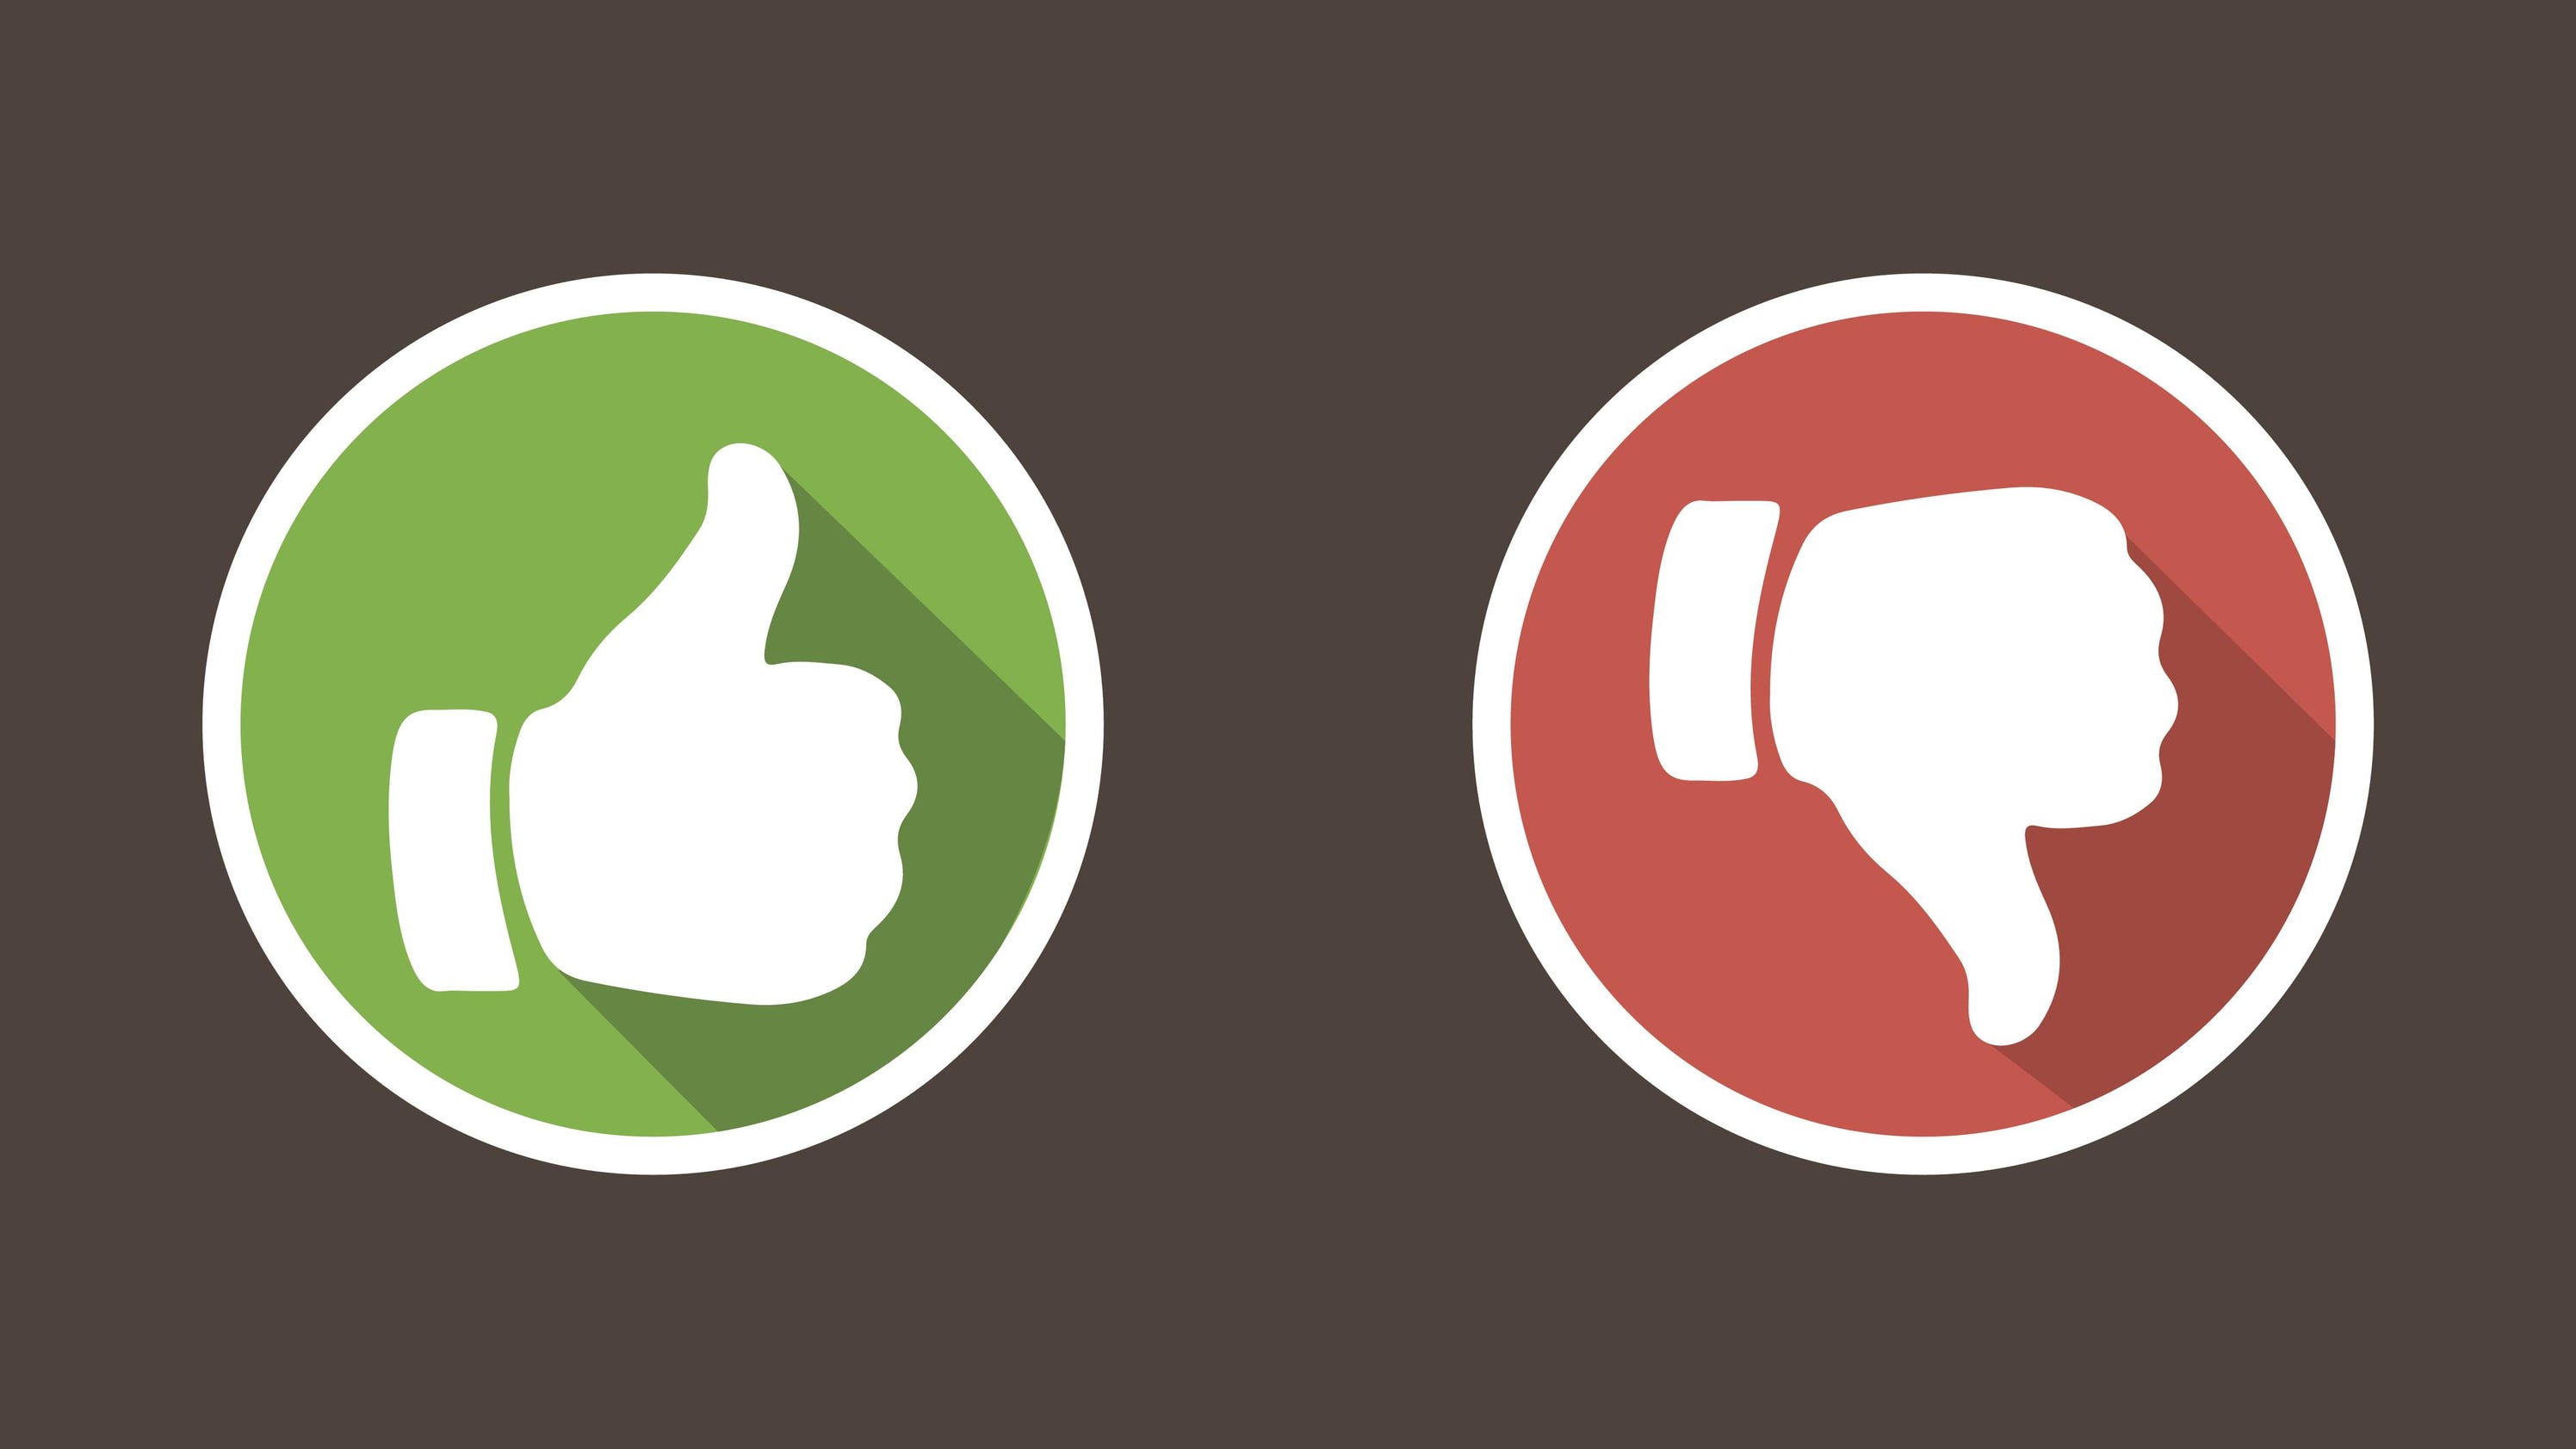 thumbs up image